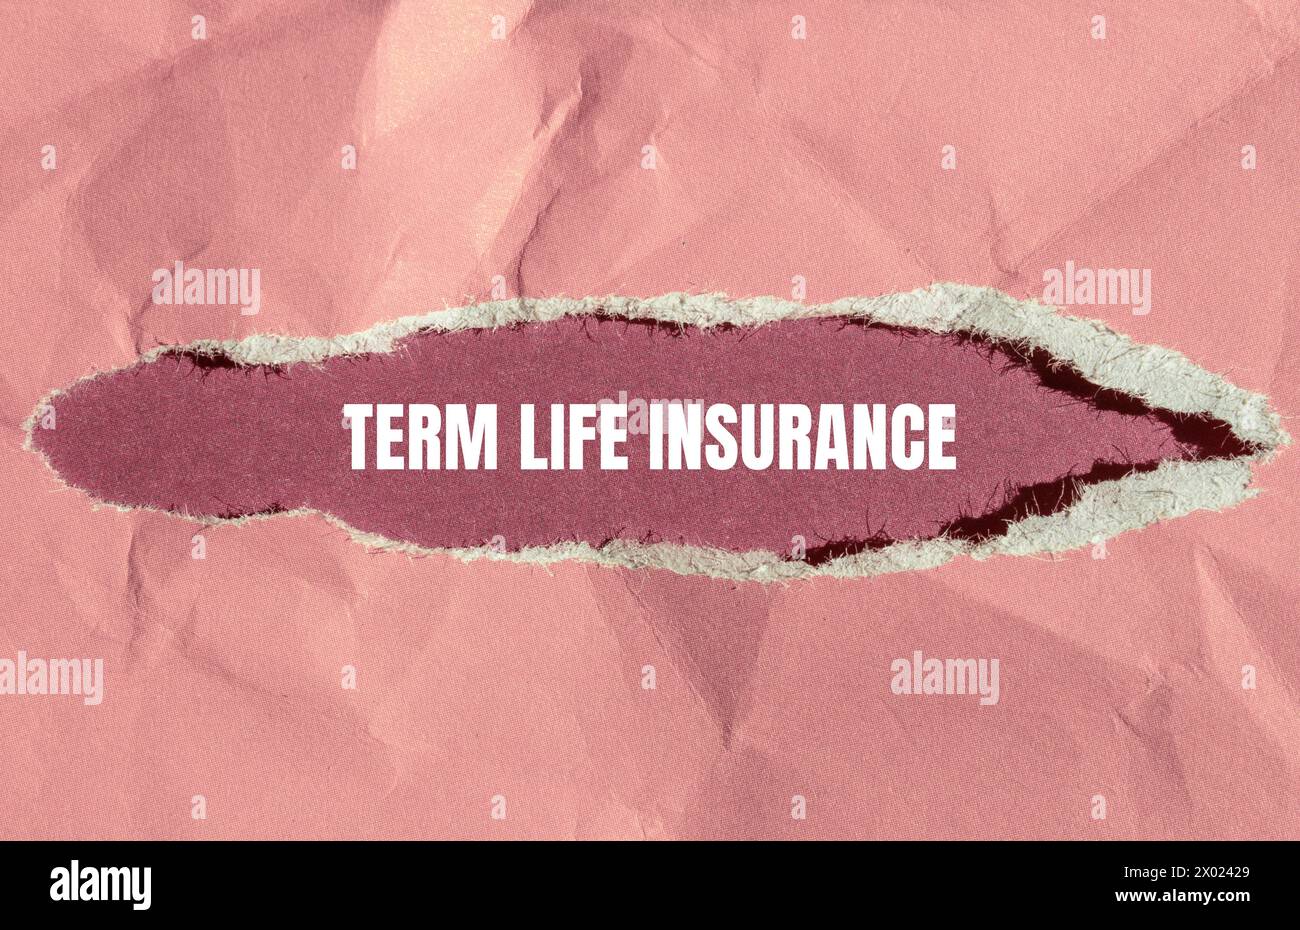 Term life insurance words written on ripped paper with pink background. Conceptual symbol. Copy space. Stock Photo